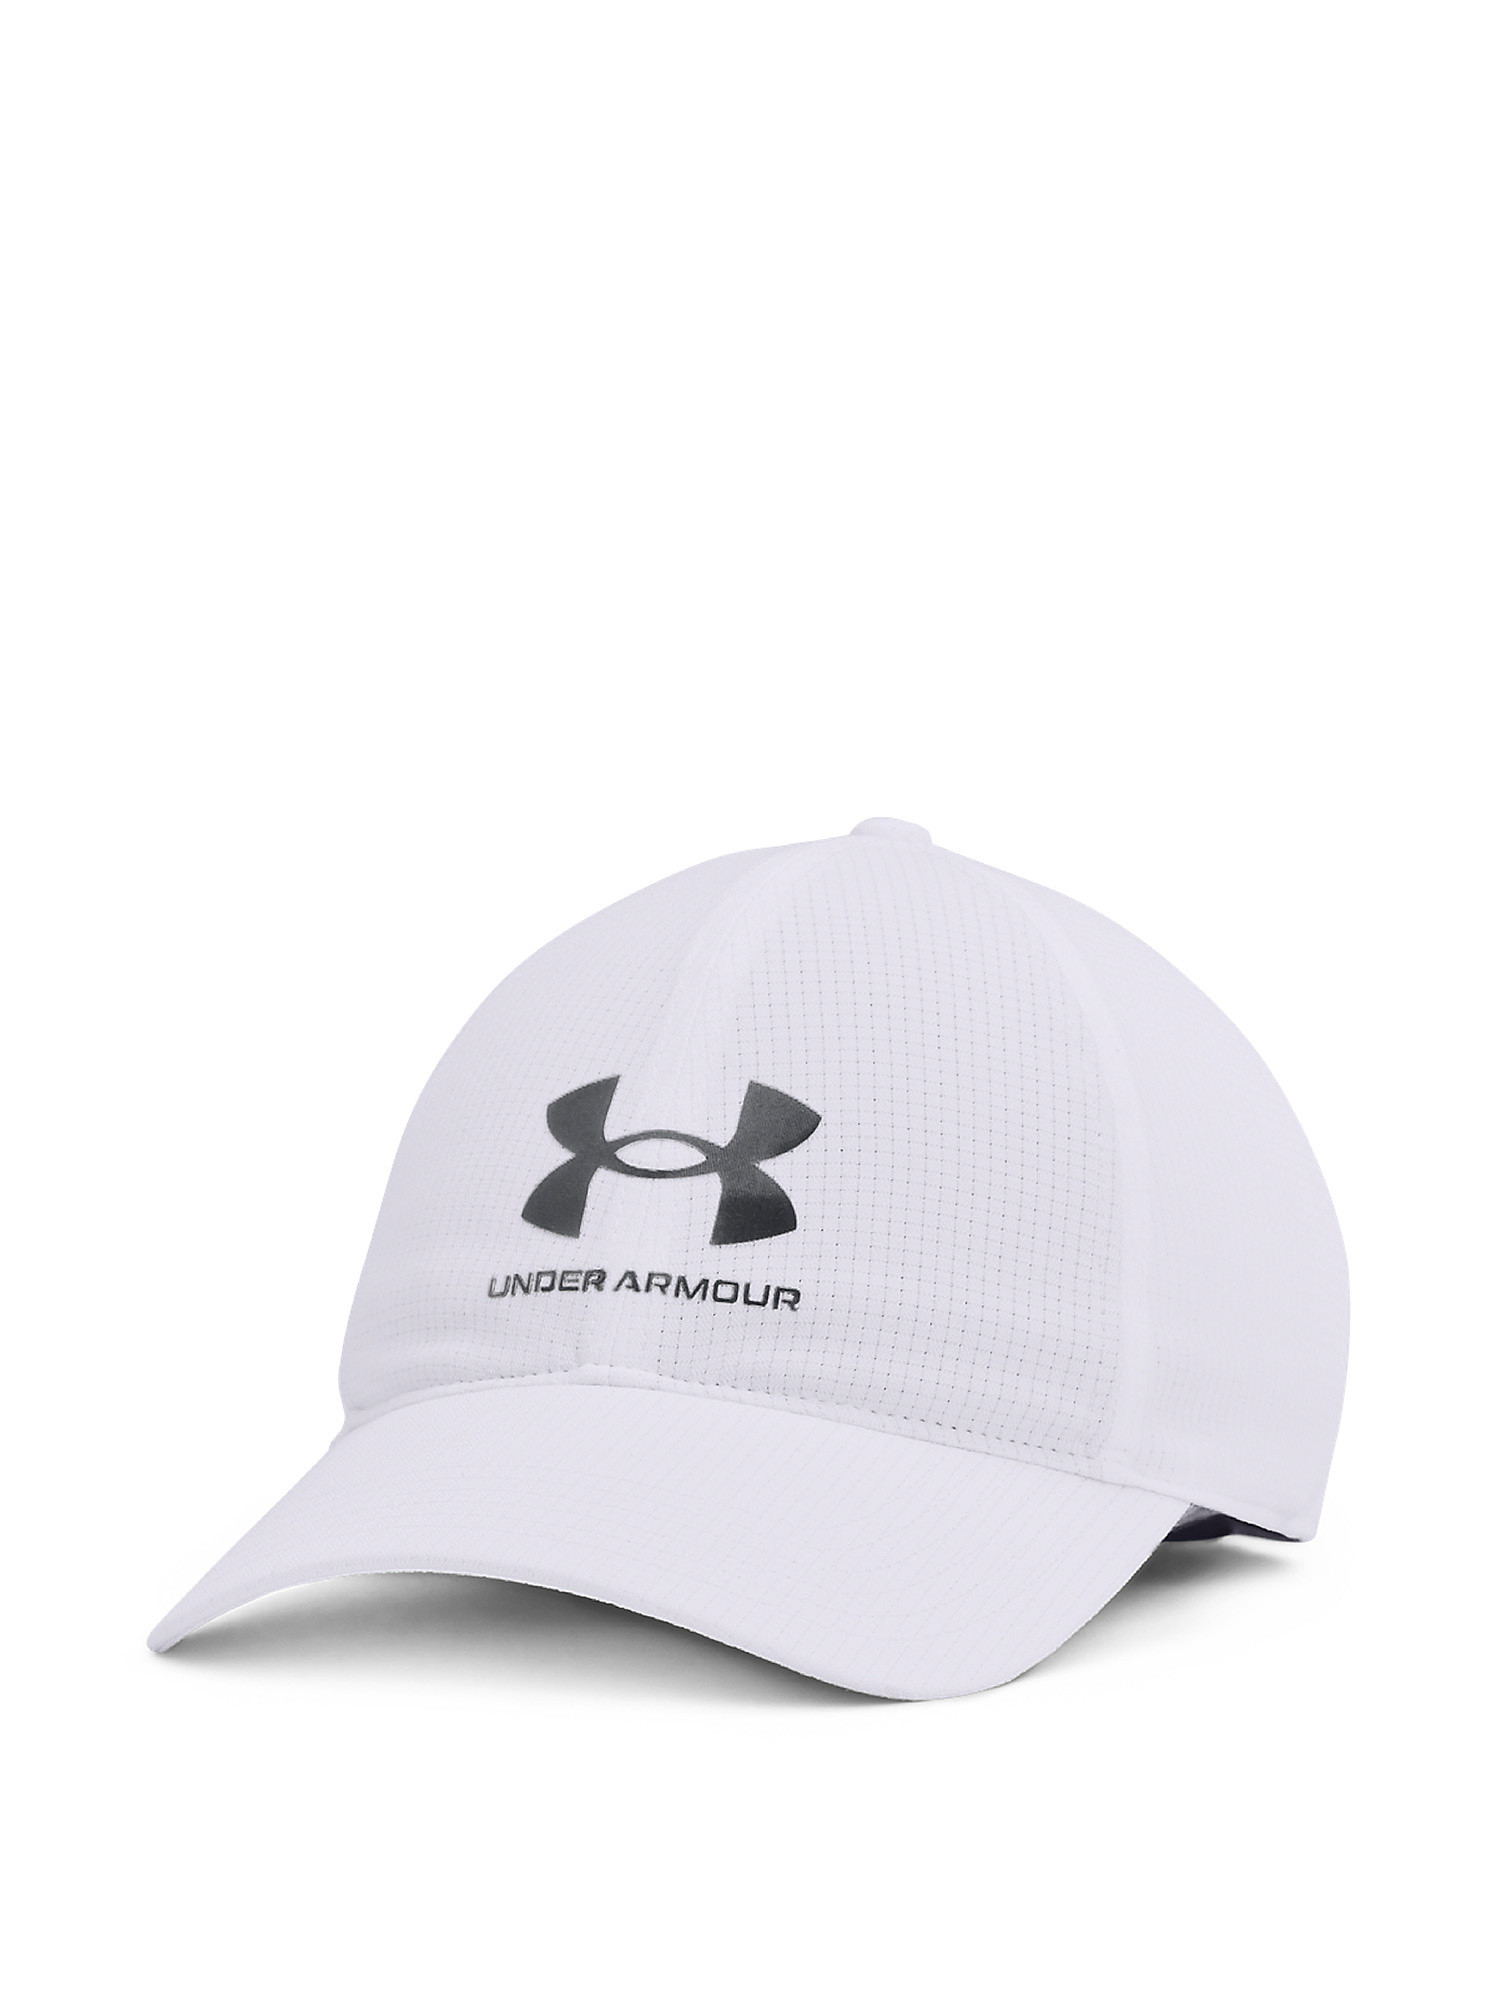 Under Armour - UA Iso-Chill ArmourVent™ Adjustable hat, White, large image number 0